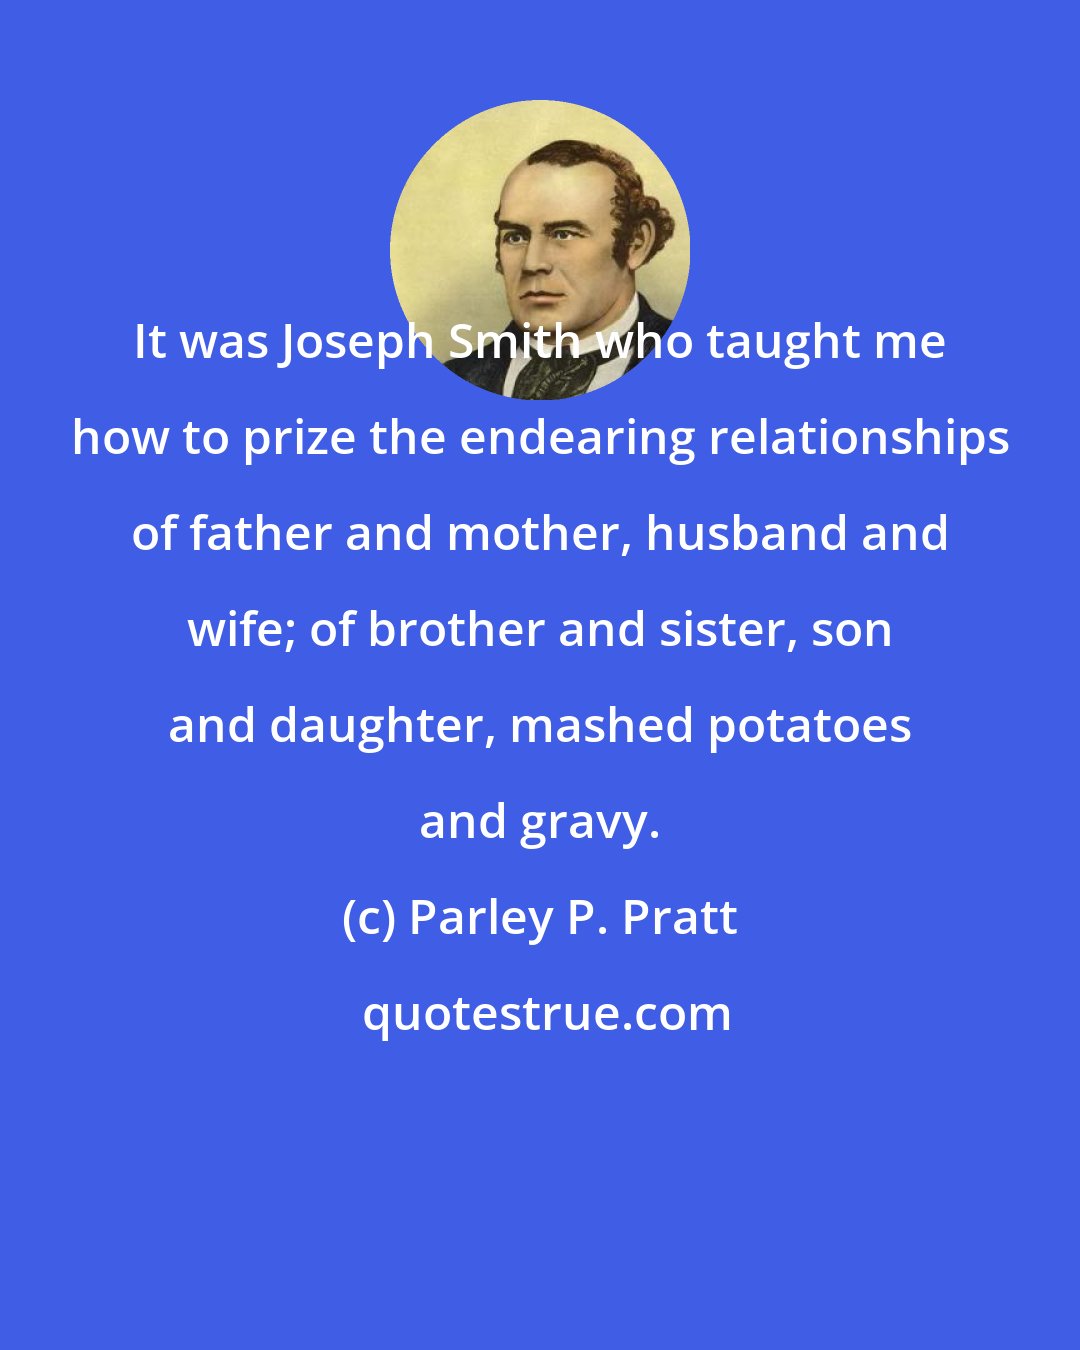 Parley P. Pratt: It was Joseph Smith who taught me how to prize the endearing relationships of father and mother, husband and wife; of brother and sister, son and daughter, mashed potatoes and gravy.